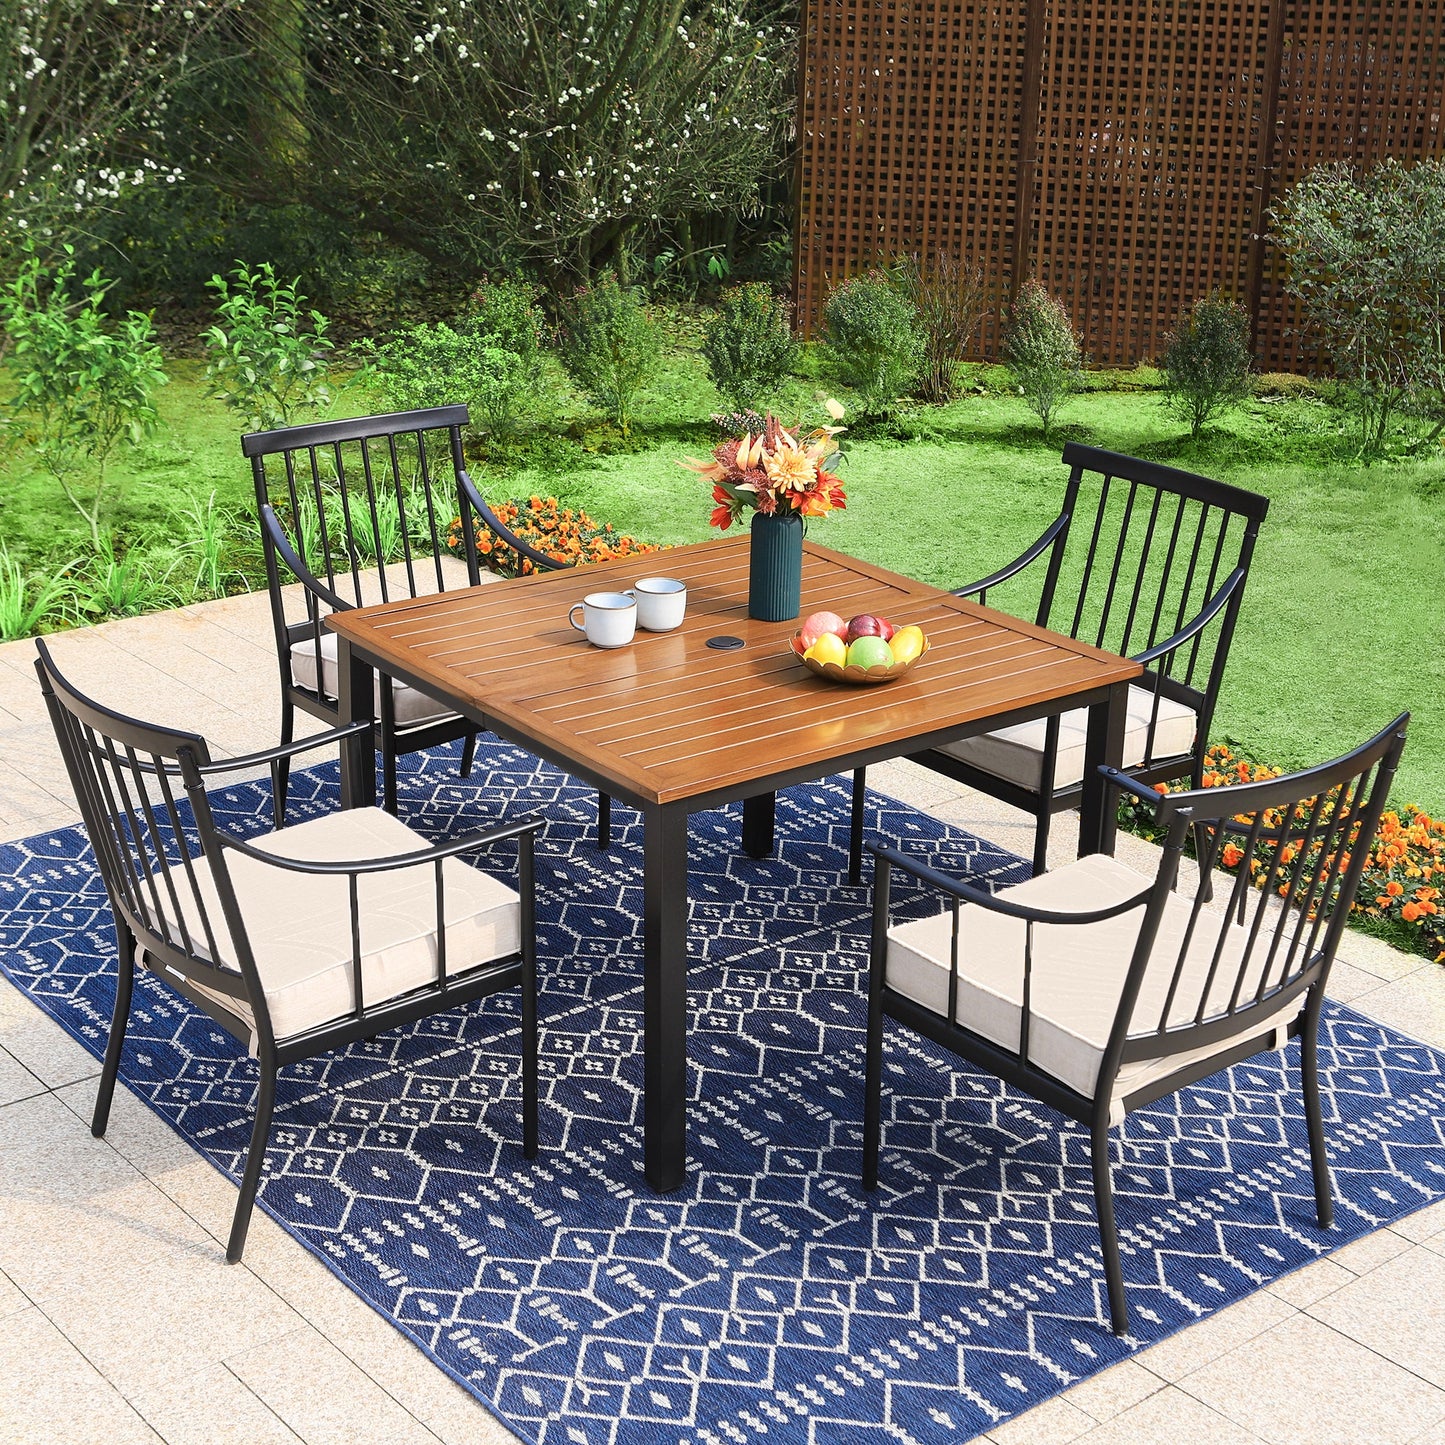 Sophia & William 5Pcs Patio Outdoor Dining Set Teak-Grain Steel Table and Cushioned Chairs Furniture Set